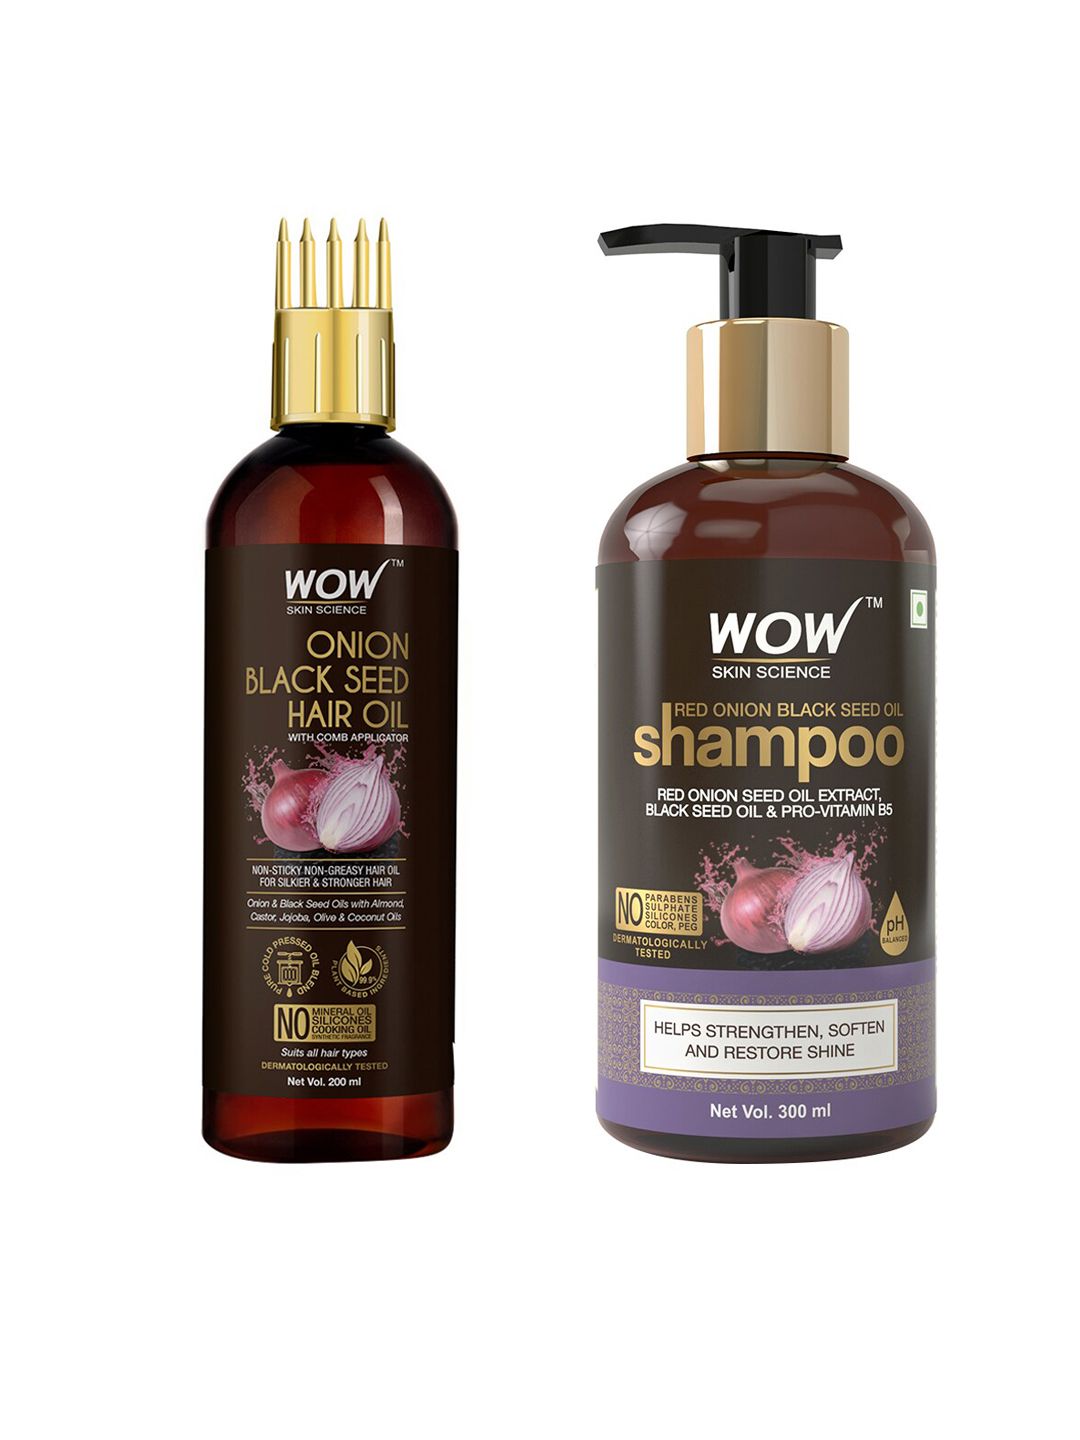 WOW SKIN SCIENCE Set of Onion Black Seed Hair Oil & Shampoo Price in India